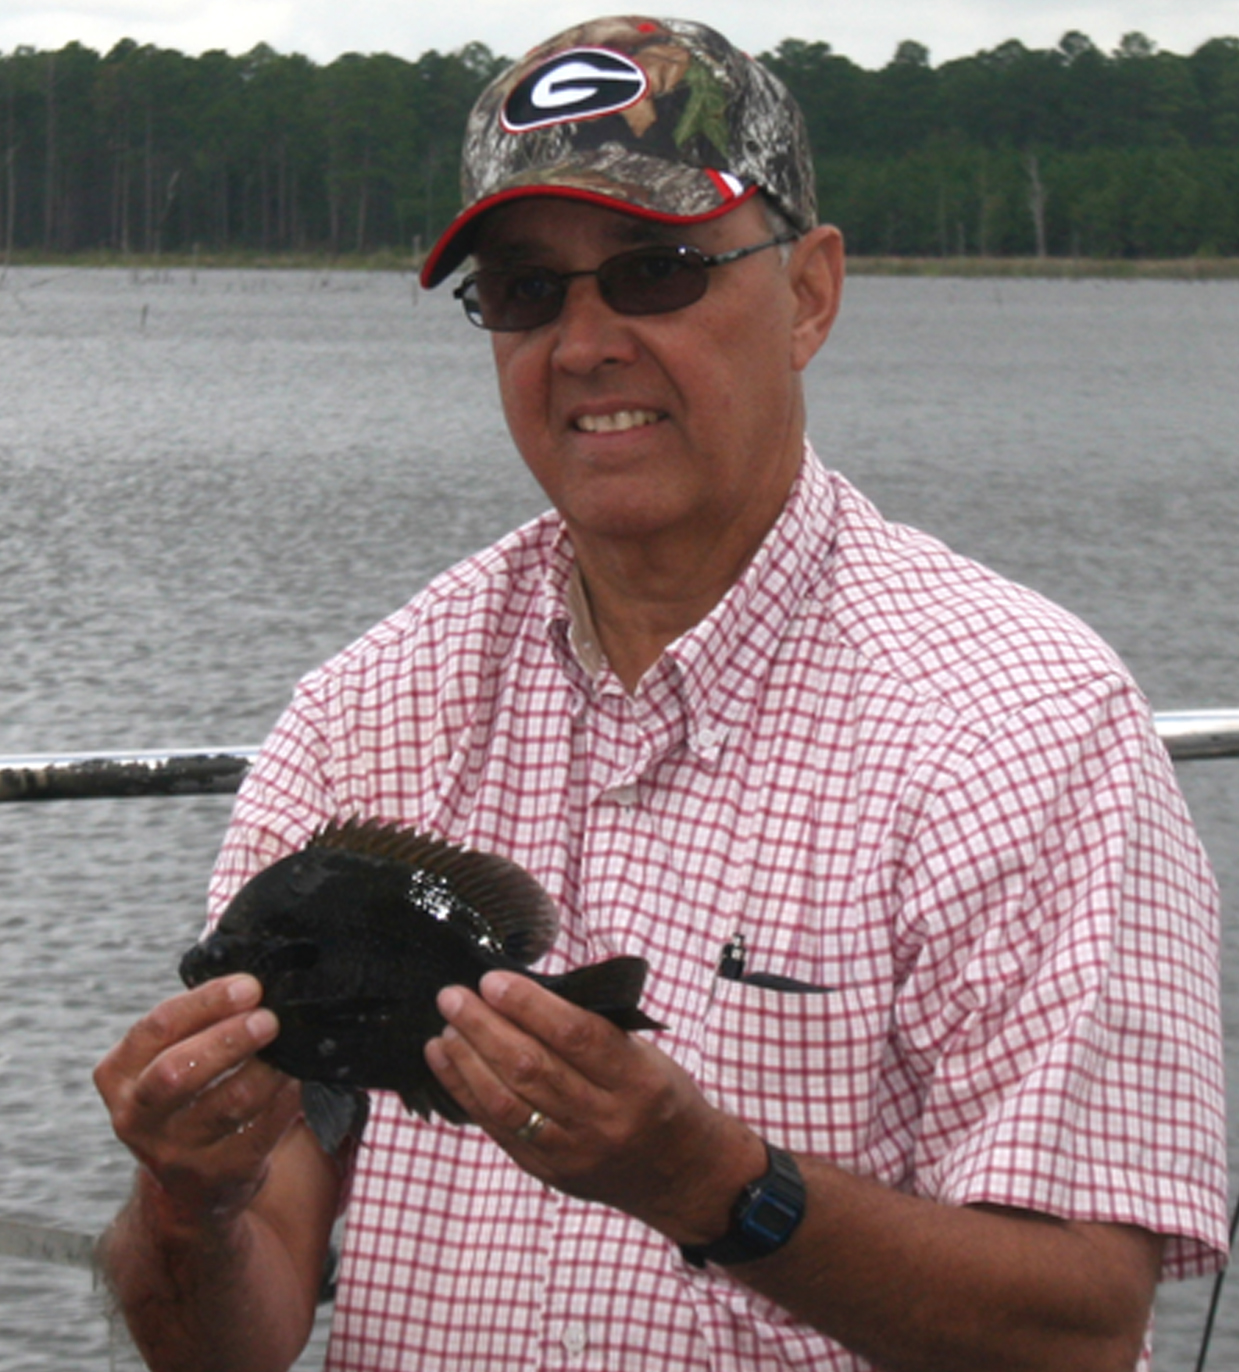 UGA Dooly County Extension agent Ronnie Barentine holds up a fish during a forestry/fisheries training for Extension agents, held in Tifton on Sept. 26, 2014.